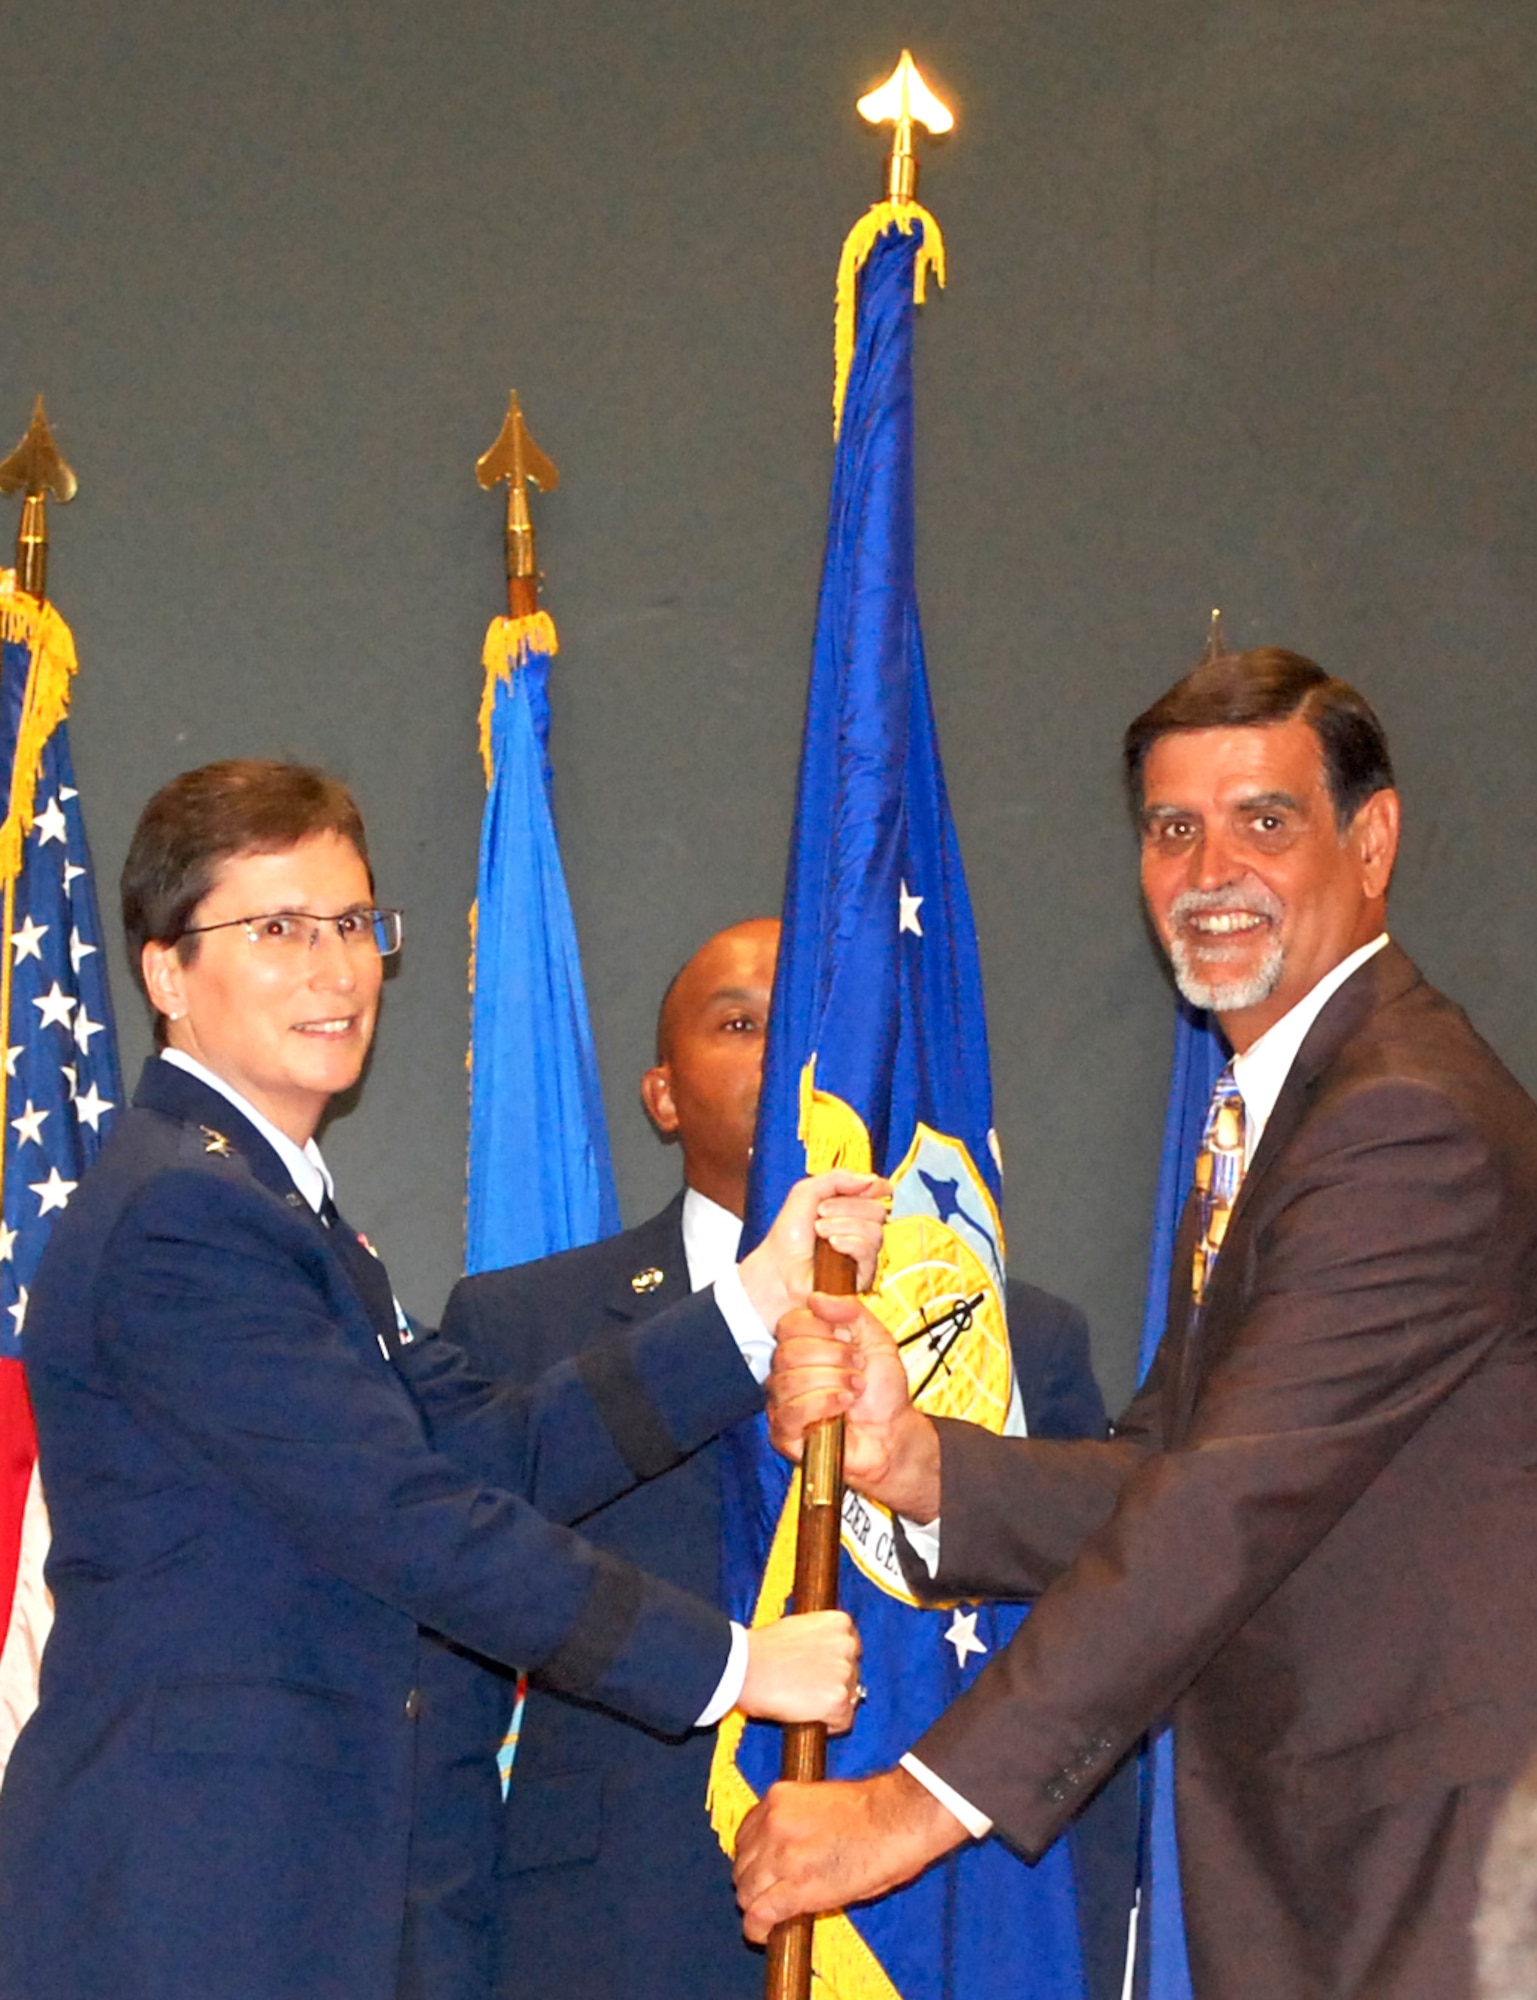 Maj. Gen. Theresa C. Carter, commander of the Air Force Installation and Mission Support Center, passes the unit flag to Randy E. Brown, incoming director of the Air Force Civil Engineer Center during an assumption of leadership ceremony July 16, 2015, at Joint Base San Antonio-Lackland. (U.S. Air Force photo/Susan Scheuer/released)